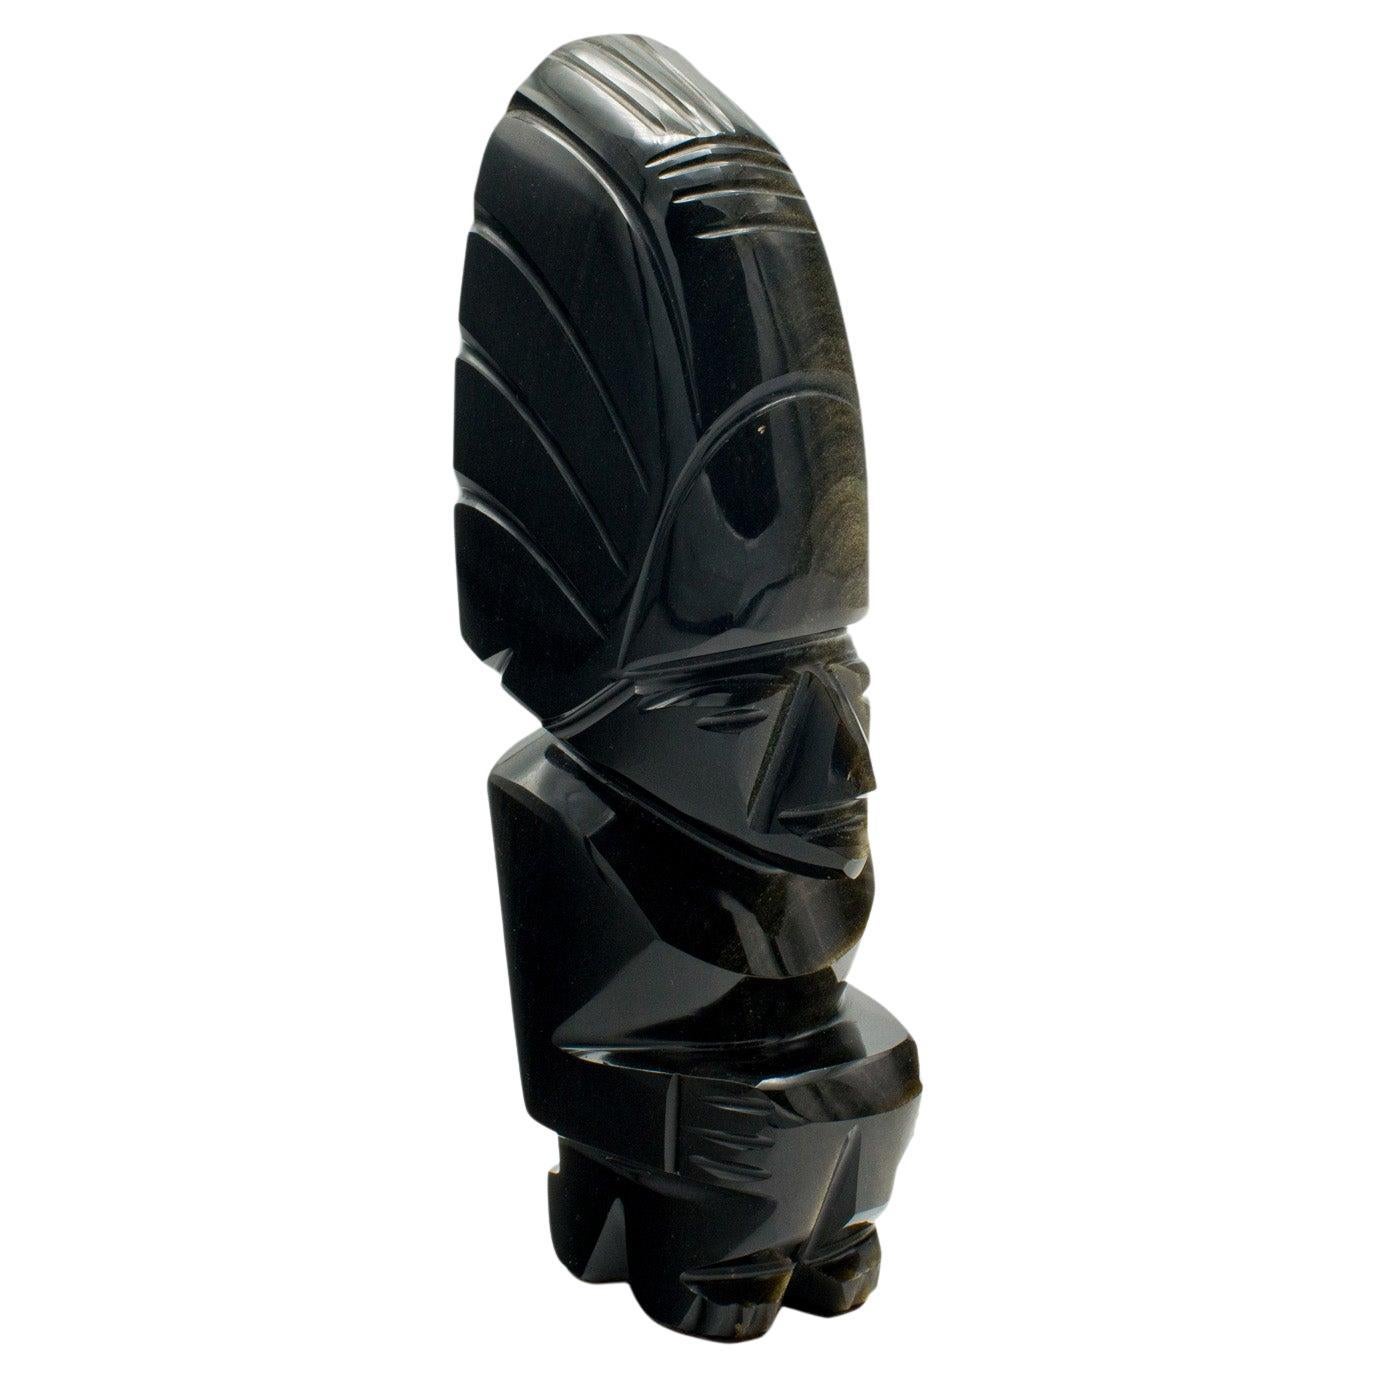 Small Vintage Aztec Idol Figure, South American, Obsidian, Mayan Sculpture, 1950 For Sale